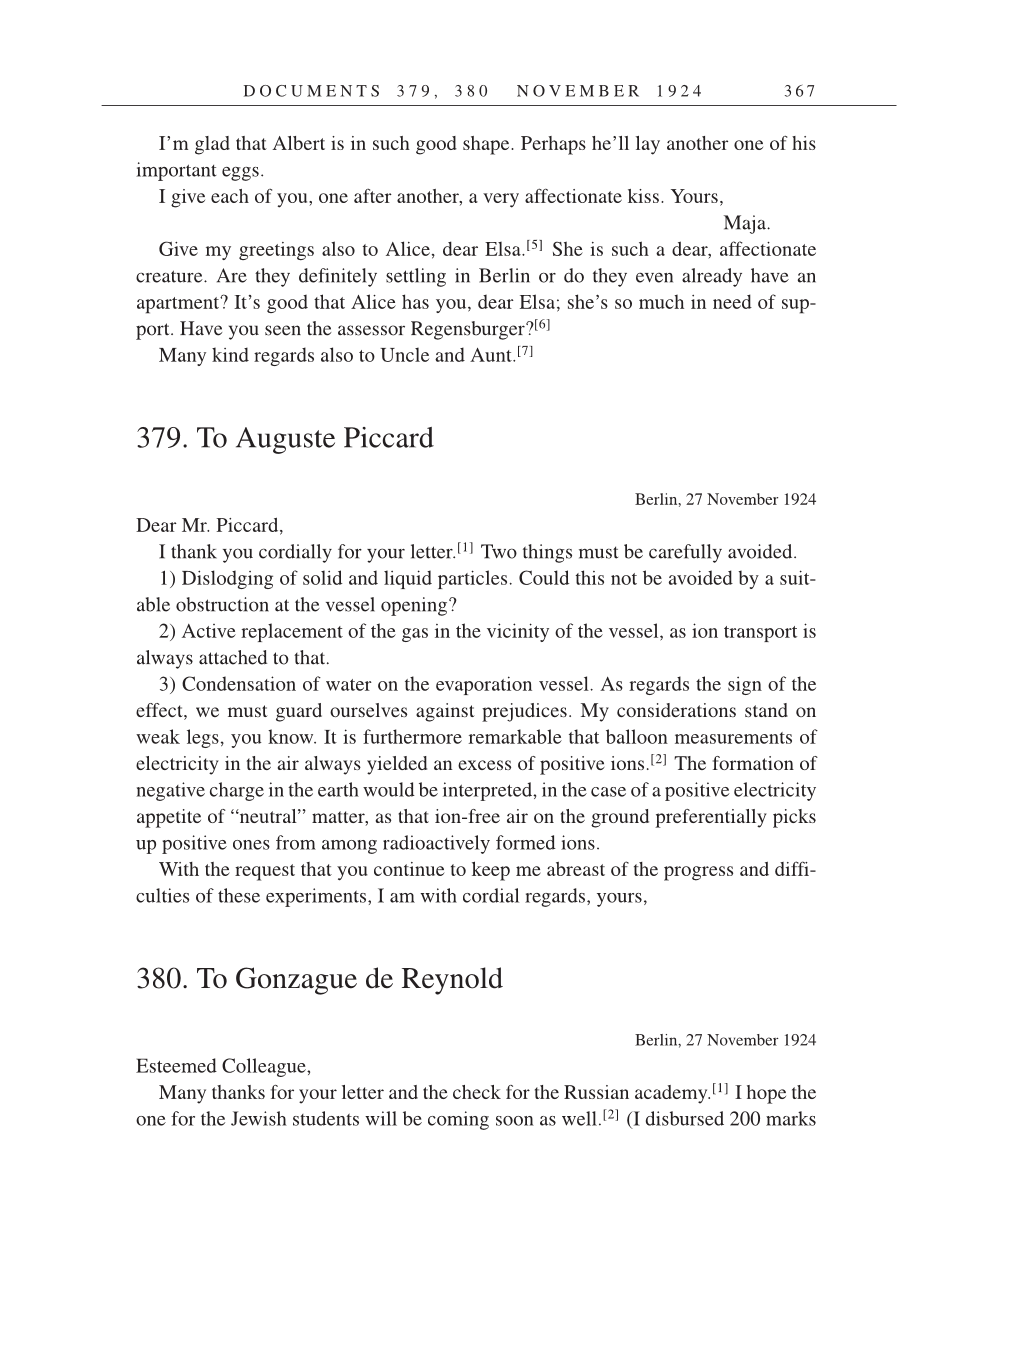 Volume 14: The Berlin Years: Writings & Correspondence, April 1923-May 1925 (English Translation Supplement) page 367